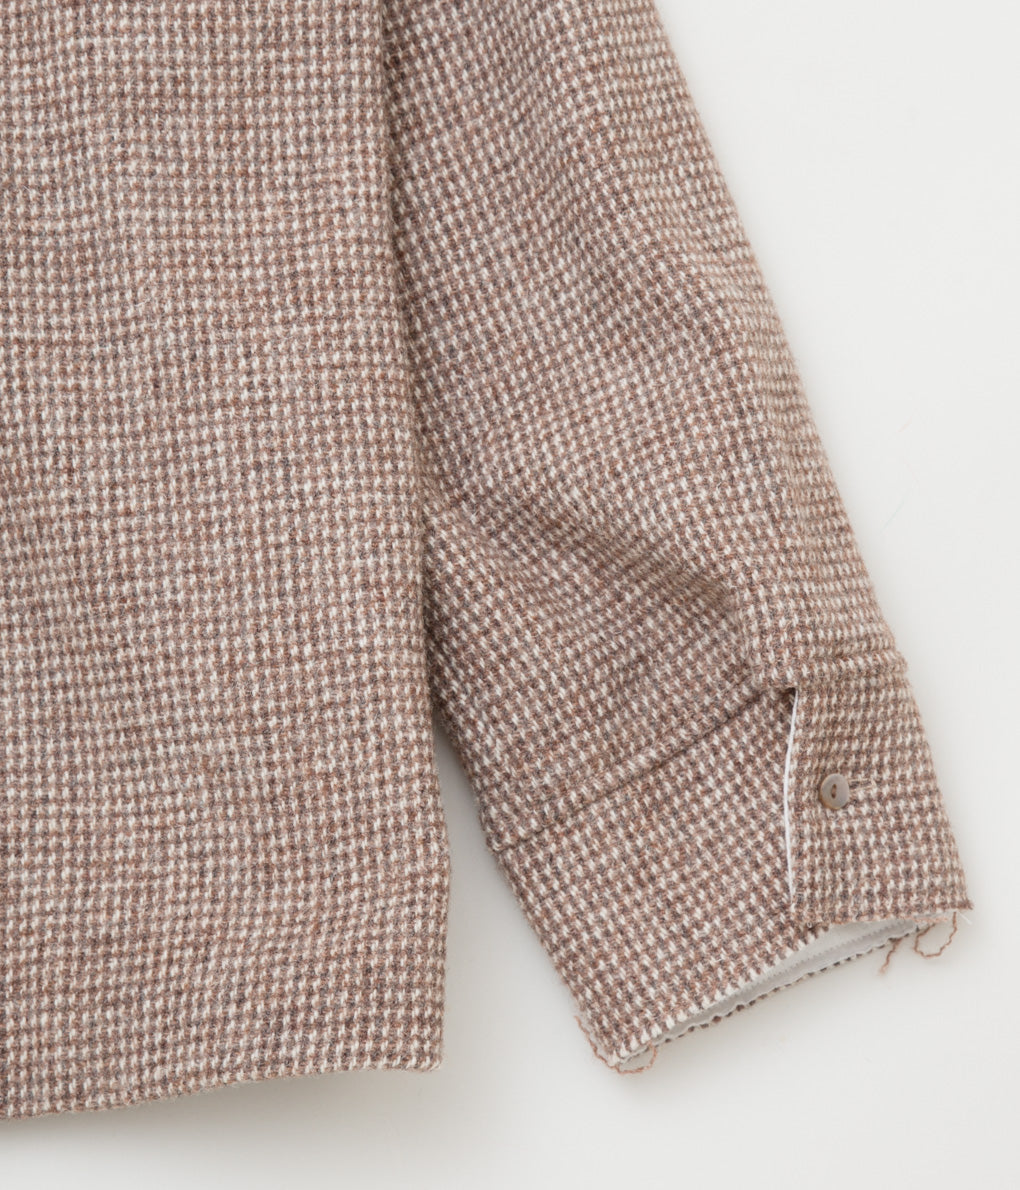 MONAD LONDON "BRAY OVERSHIRT (DEADSTOCK DONEGAL TWEED 100% WOOL)"(BROWN/OAT CHECK)